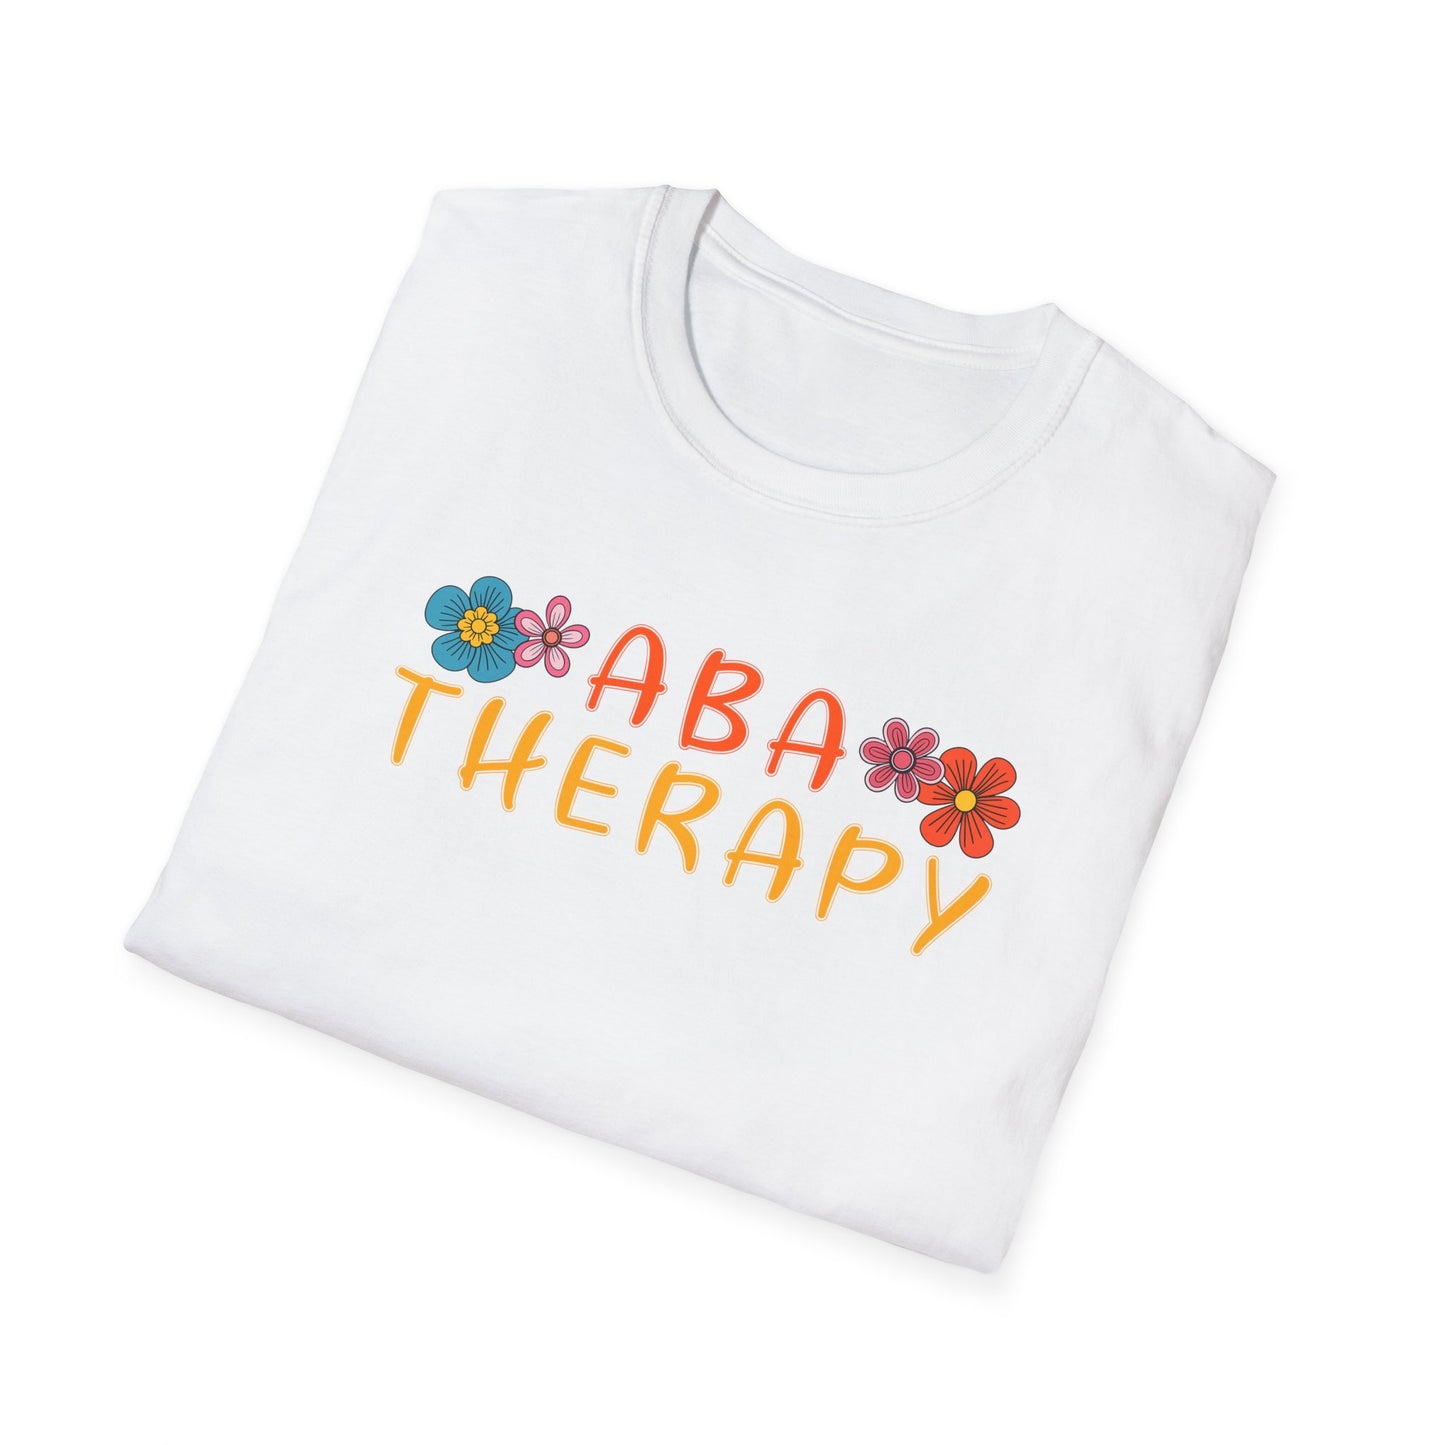 "ABA Therapy" Unisex Softstyle T-Shirt